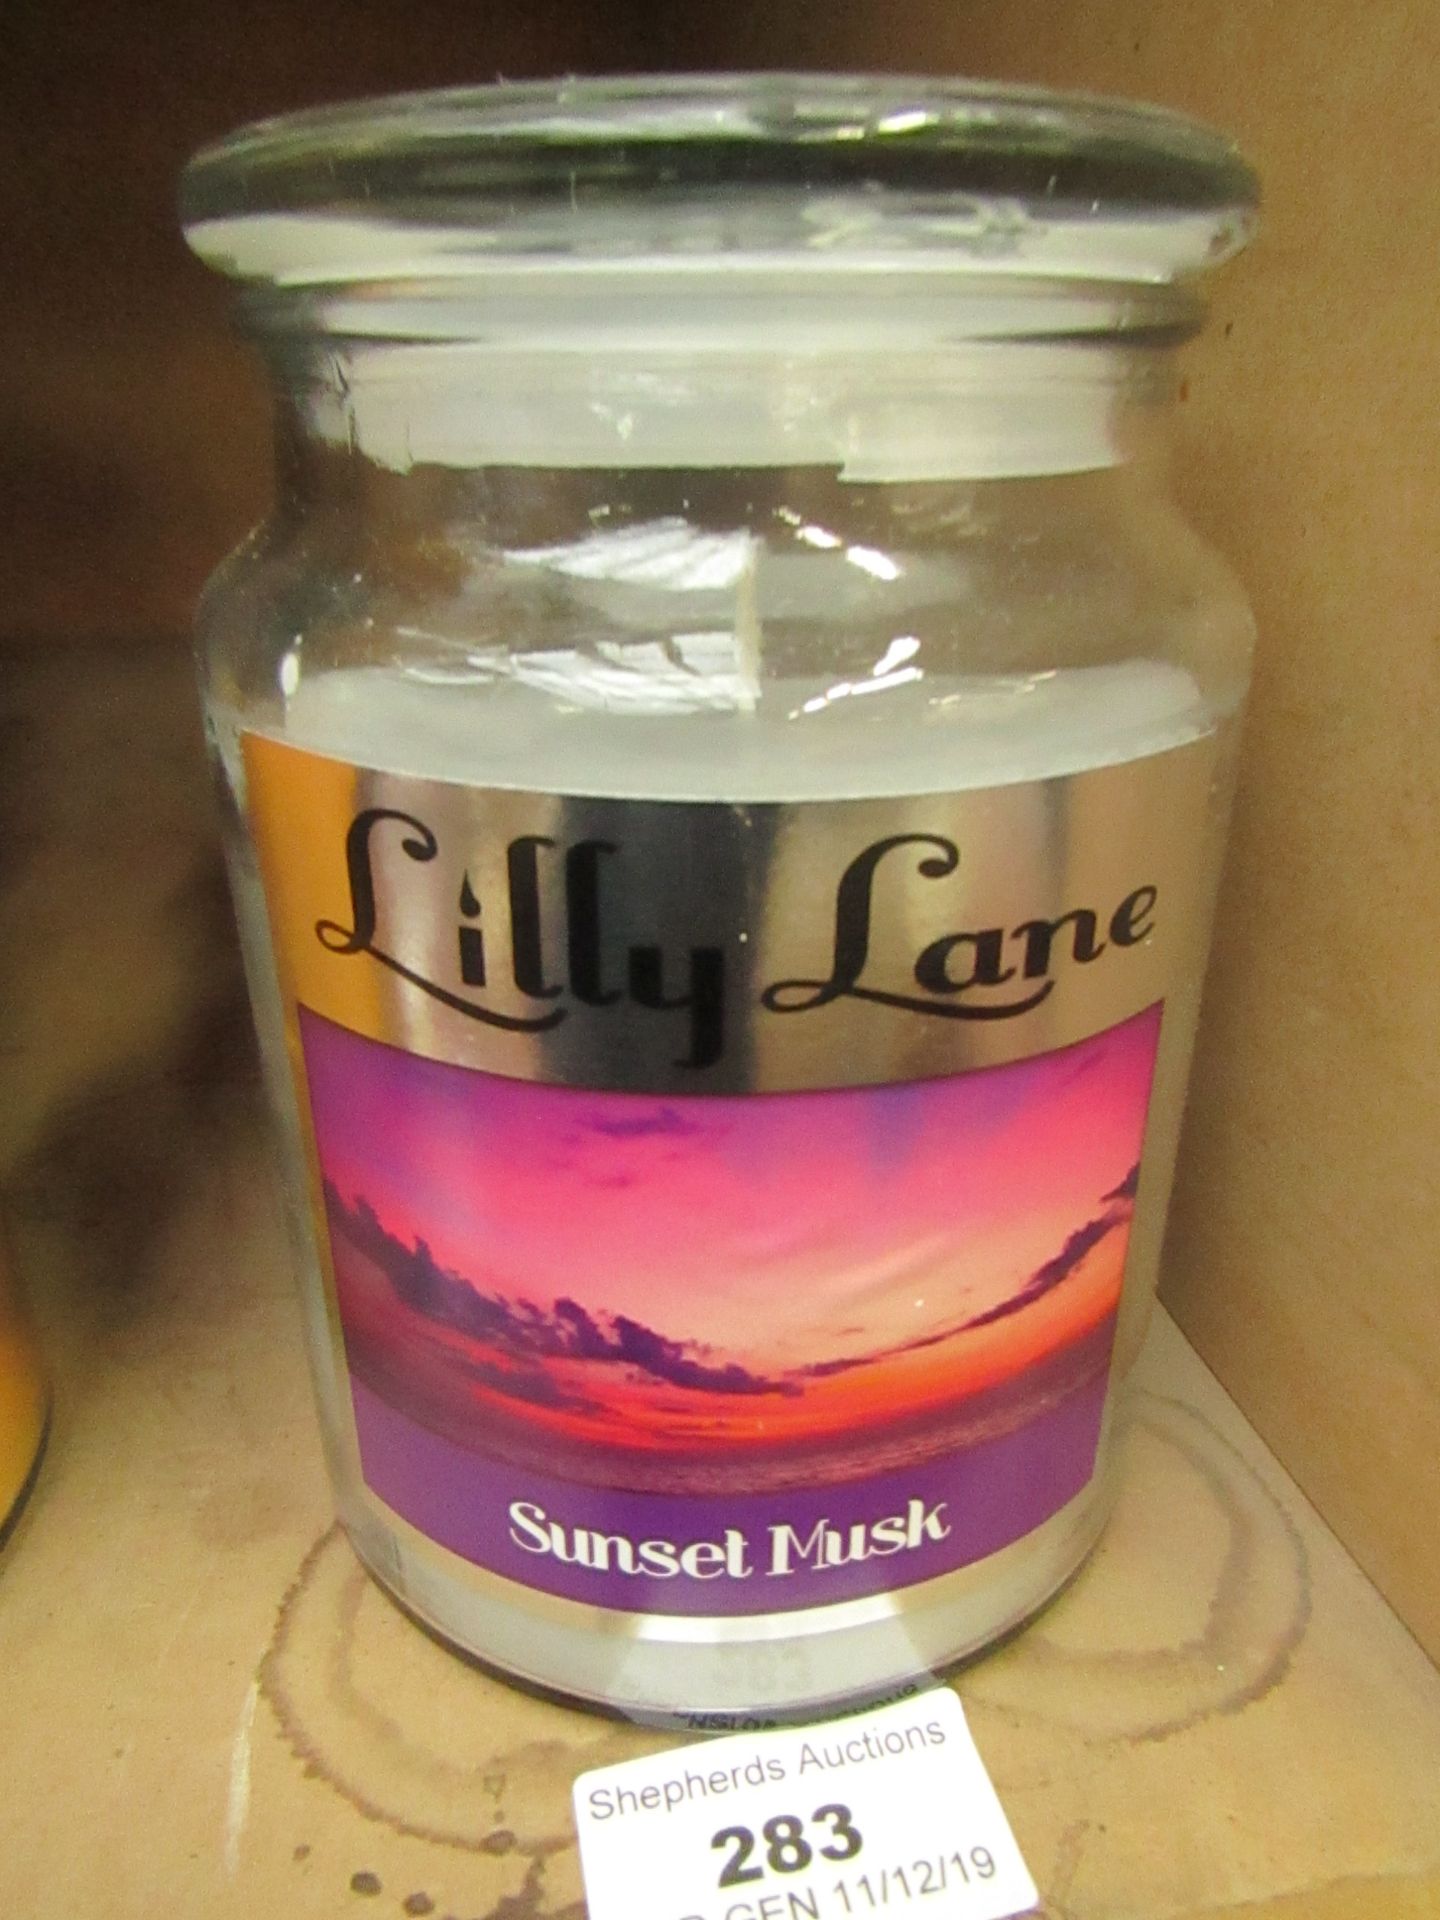 Lilly Lane - Sunset Musk Scented Candle, new.